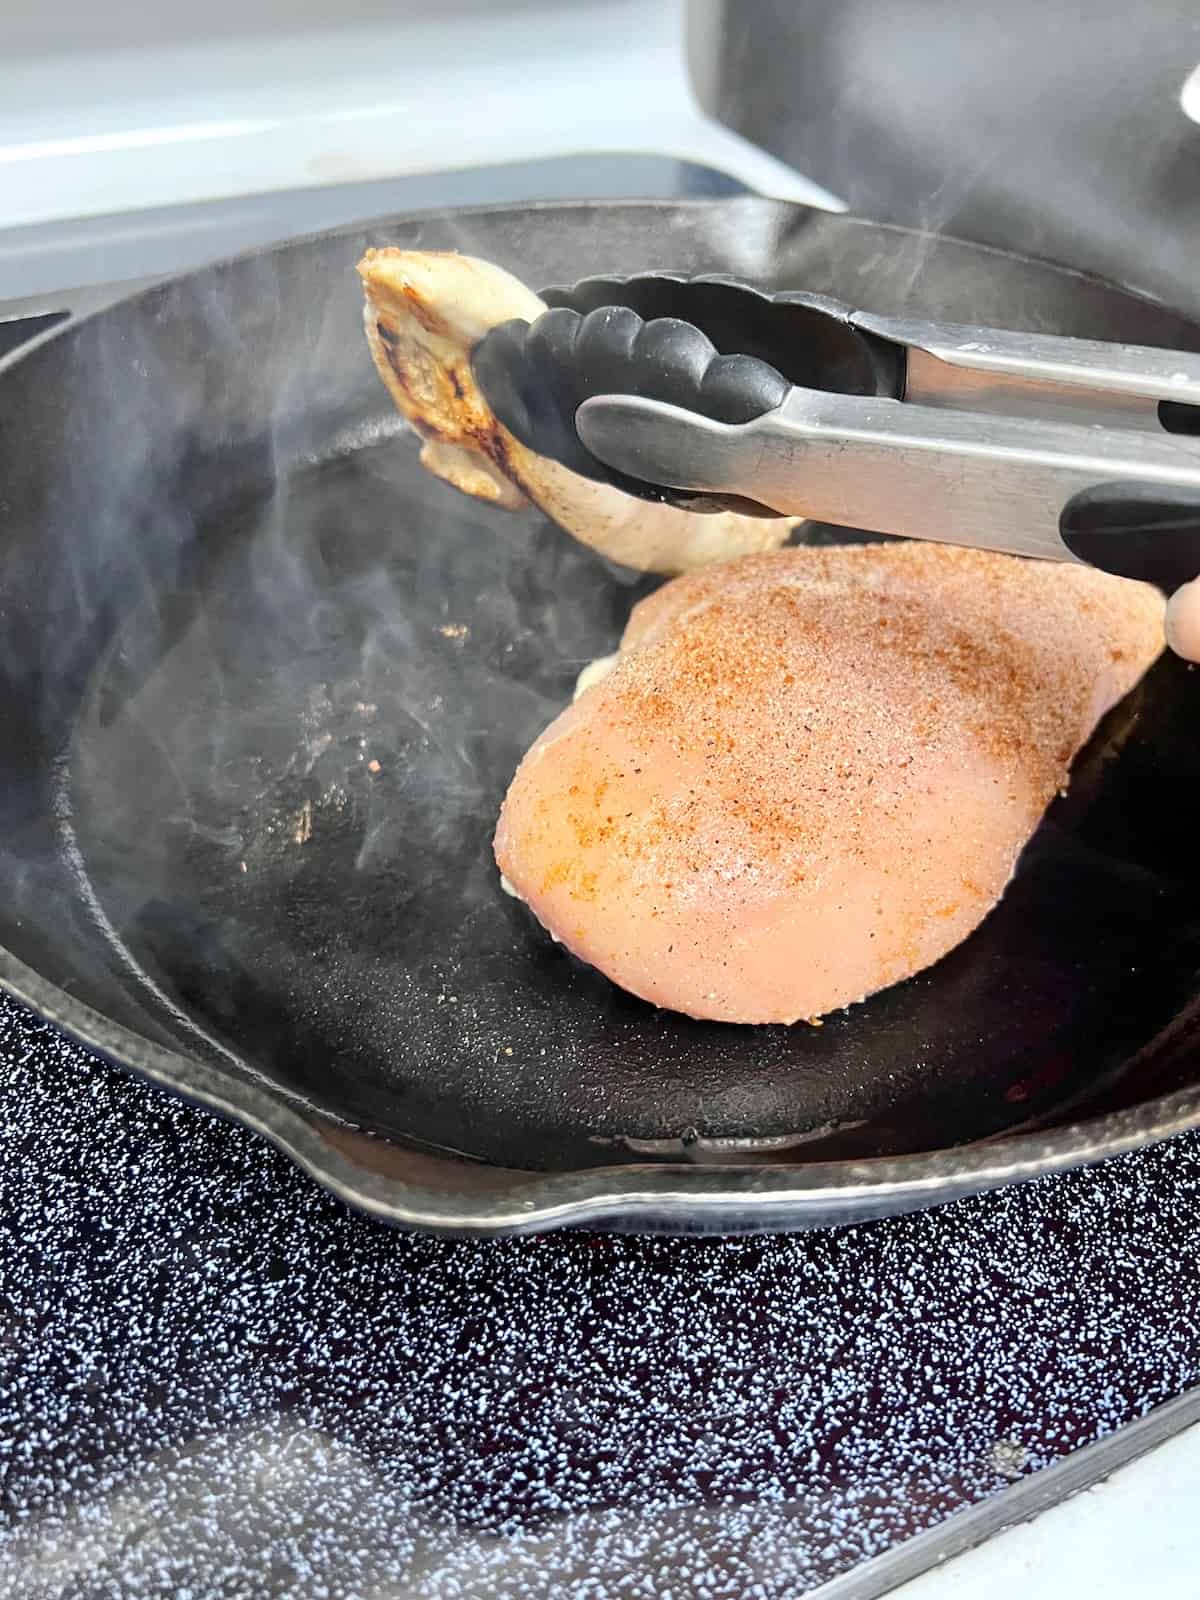 Flipping the chicken to cook the other side in the cast iron skillet.